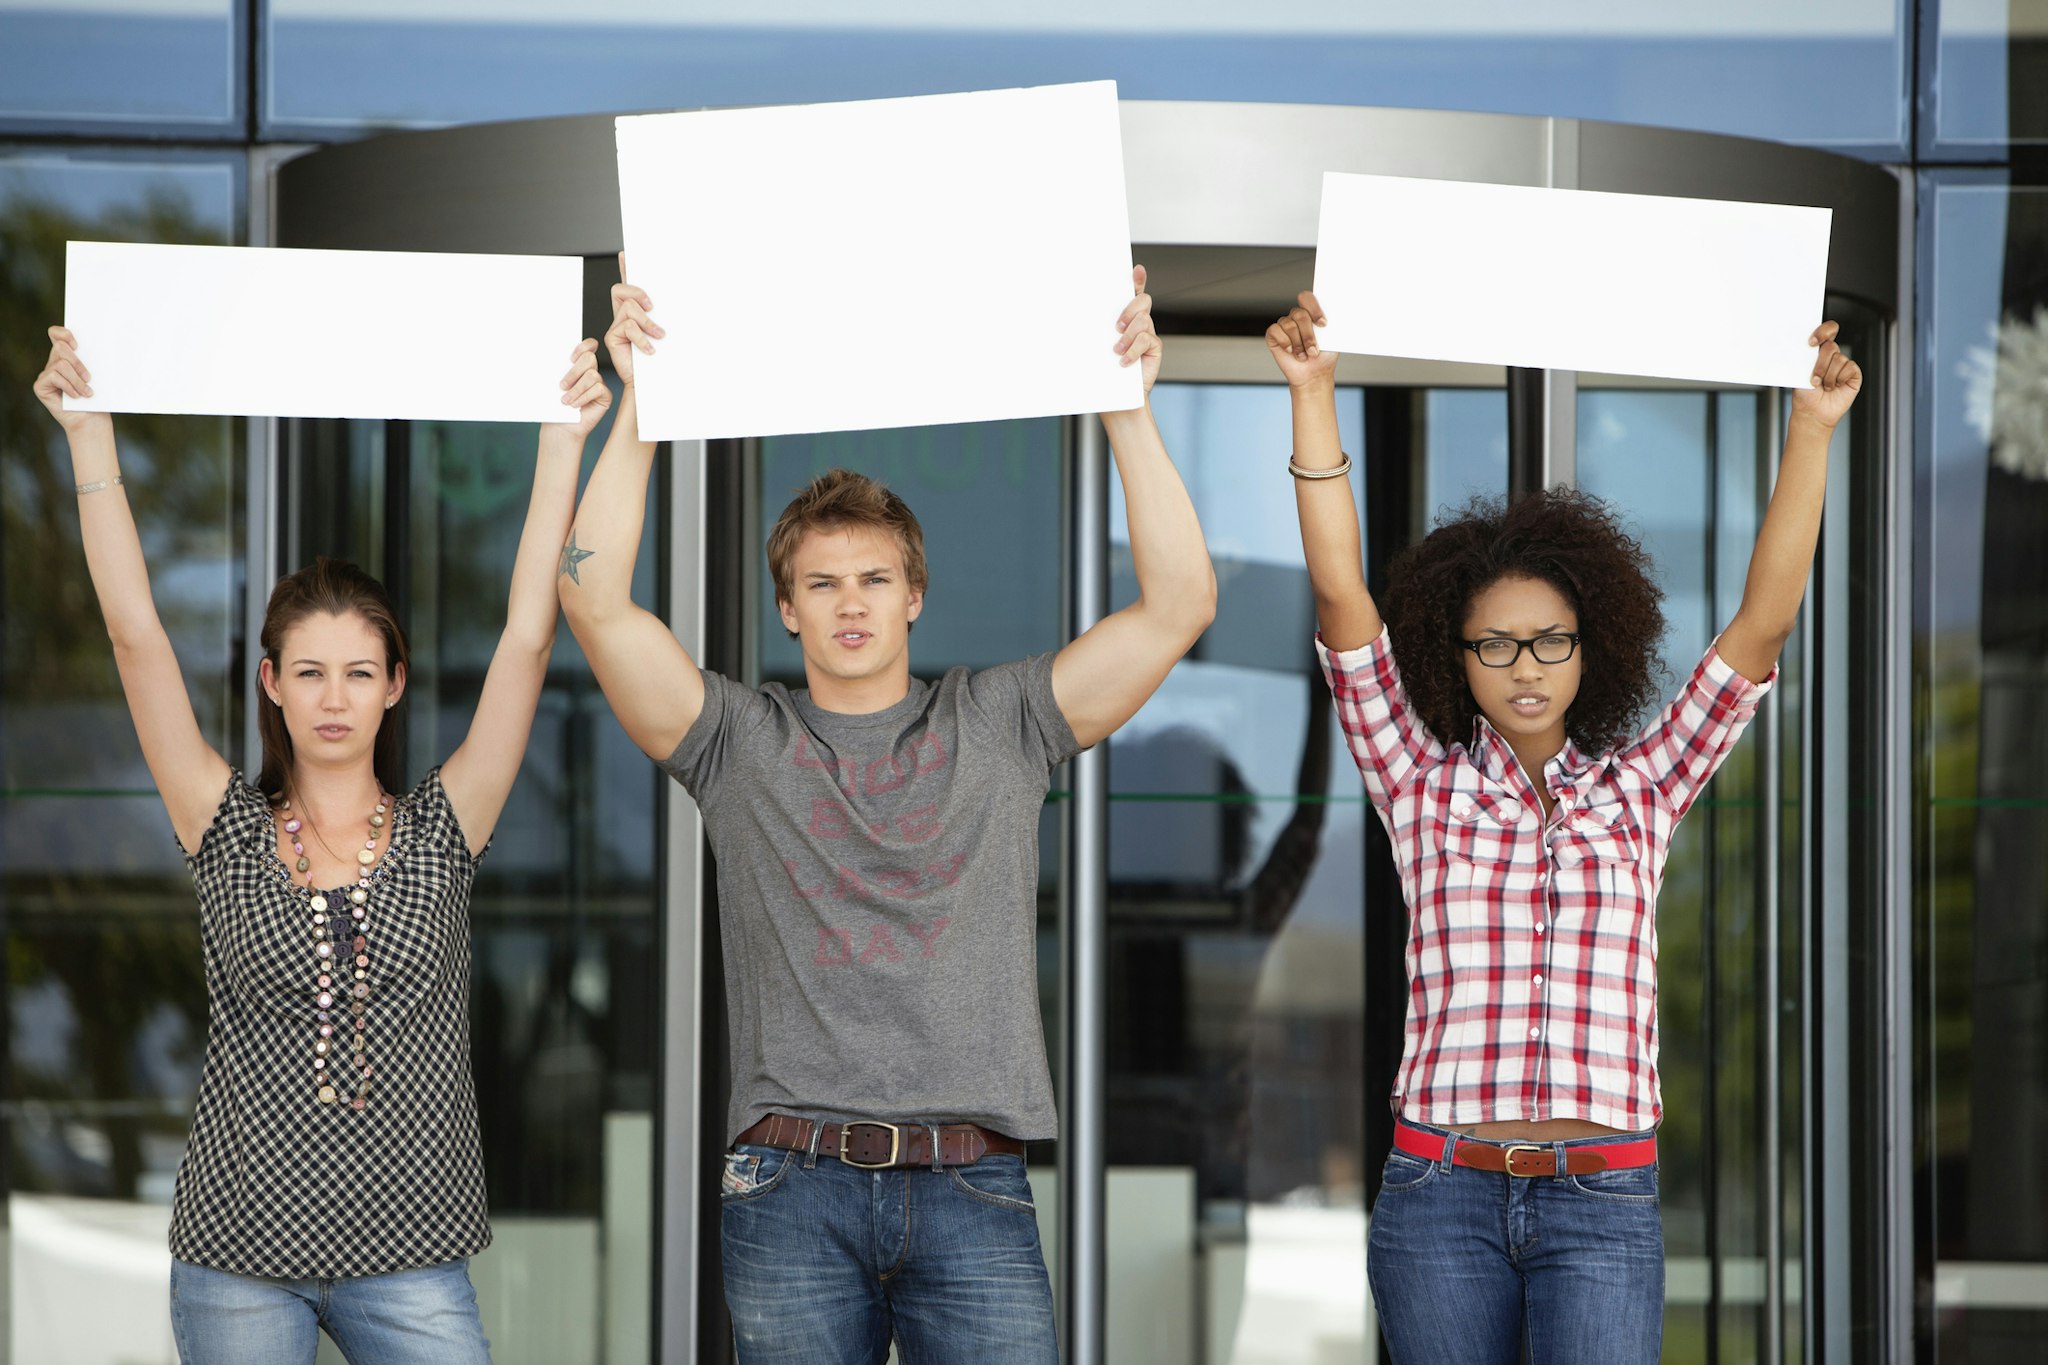 Three friends protesting with blank placards - stock photo